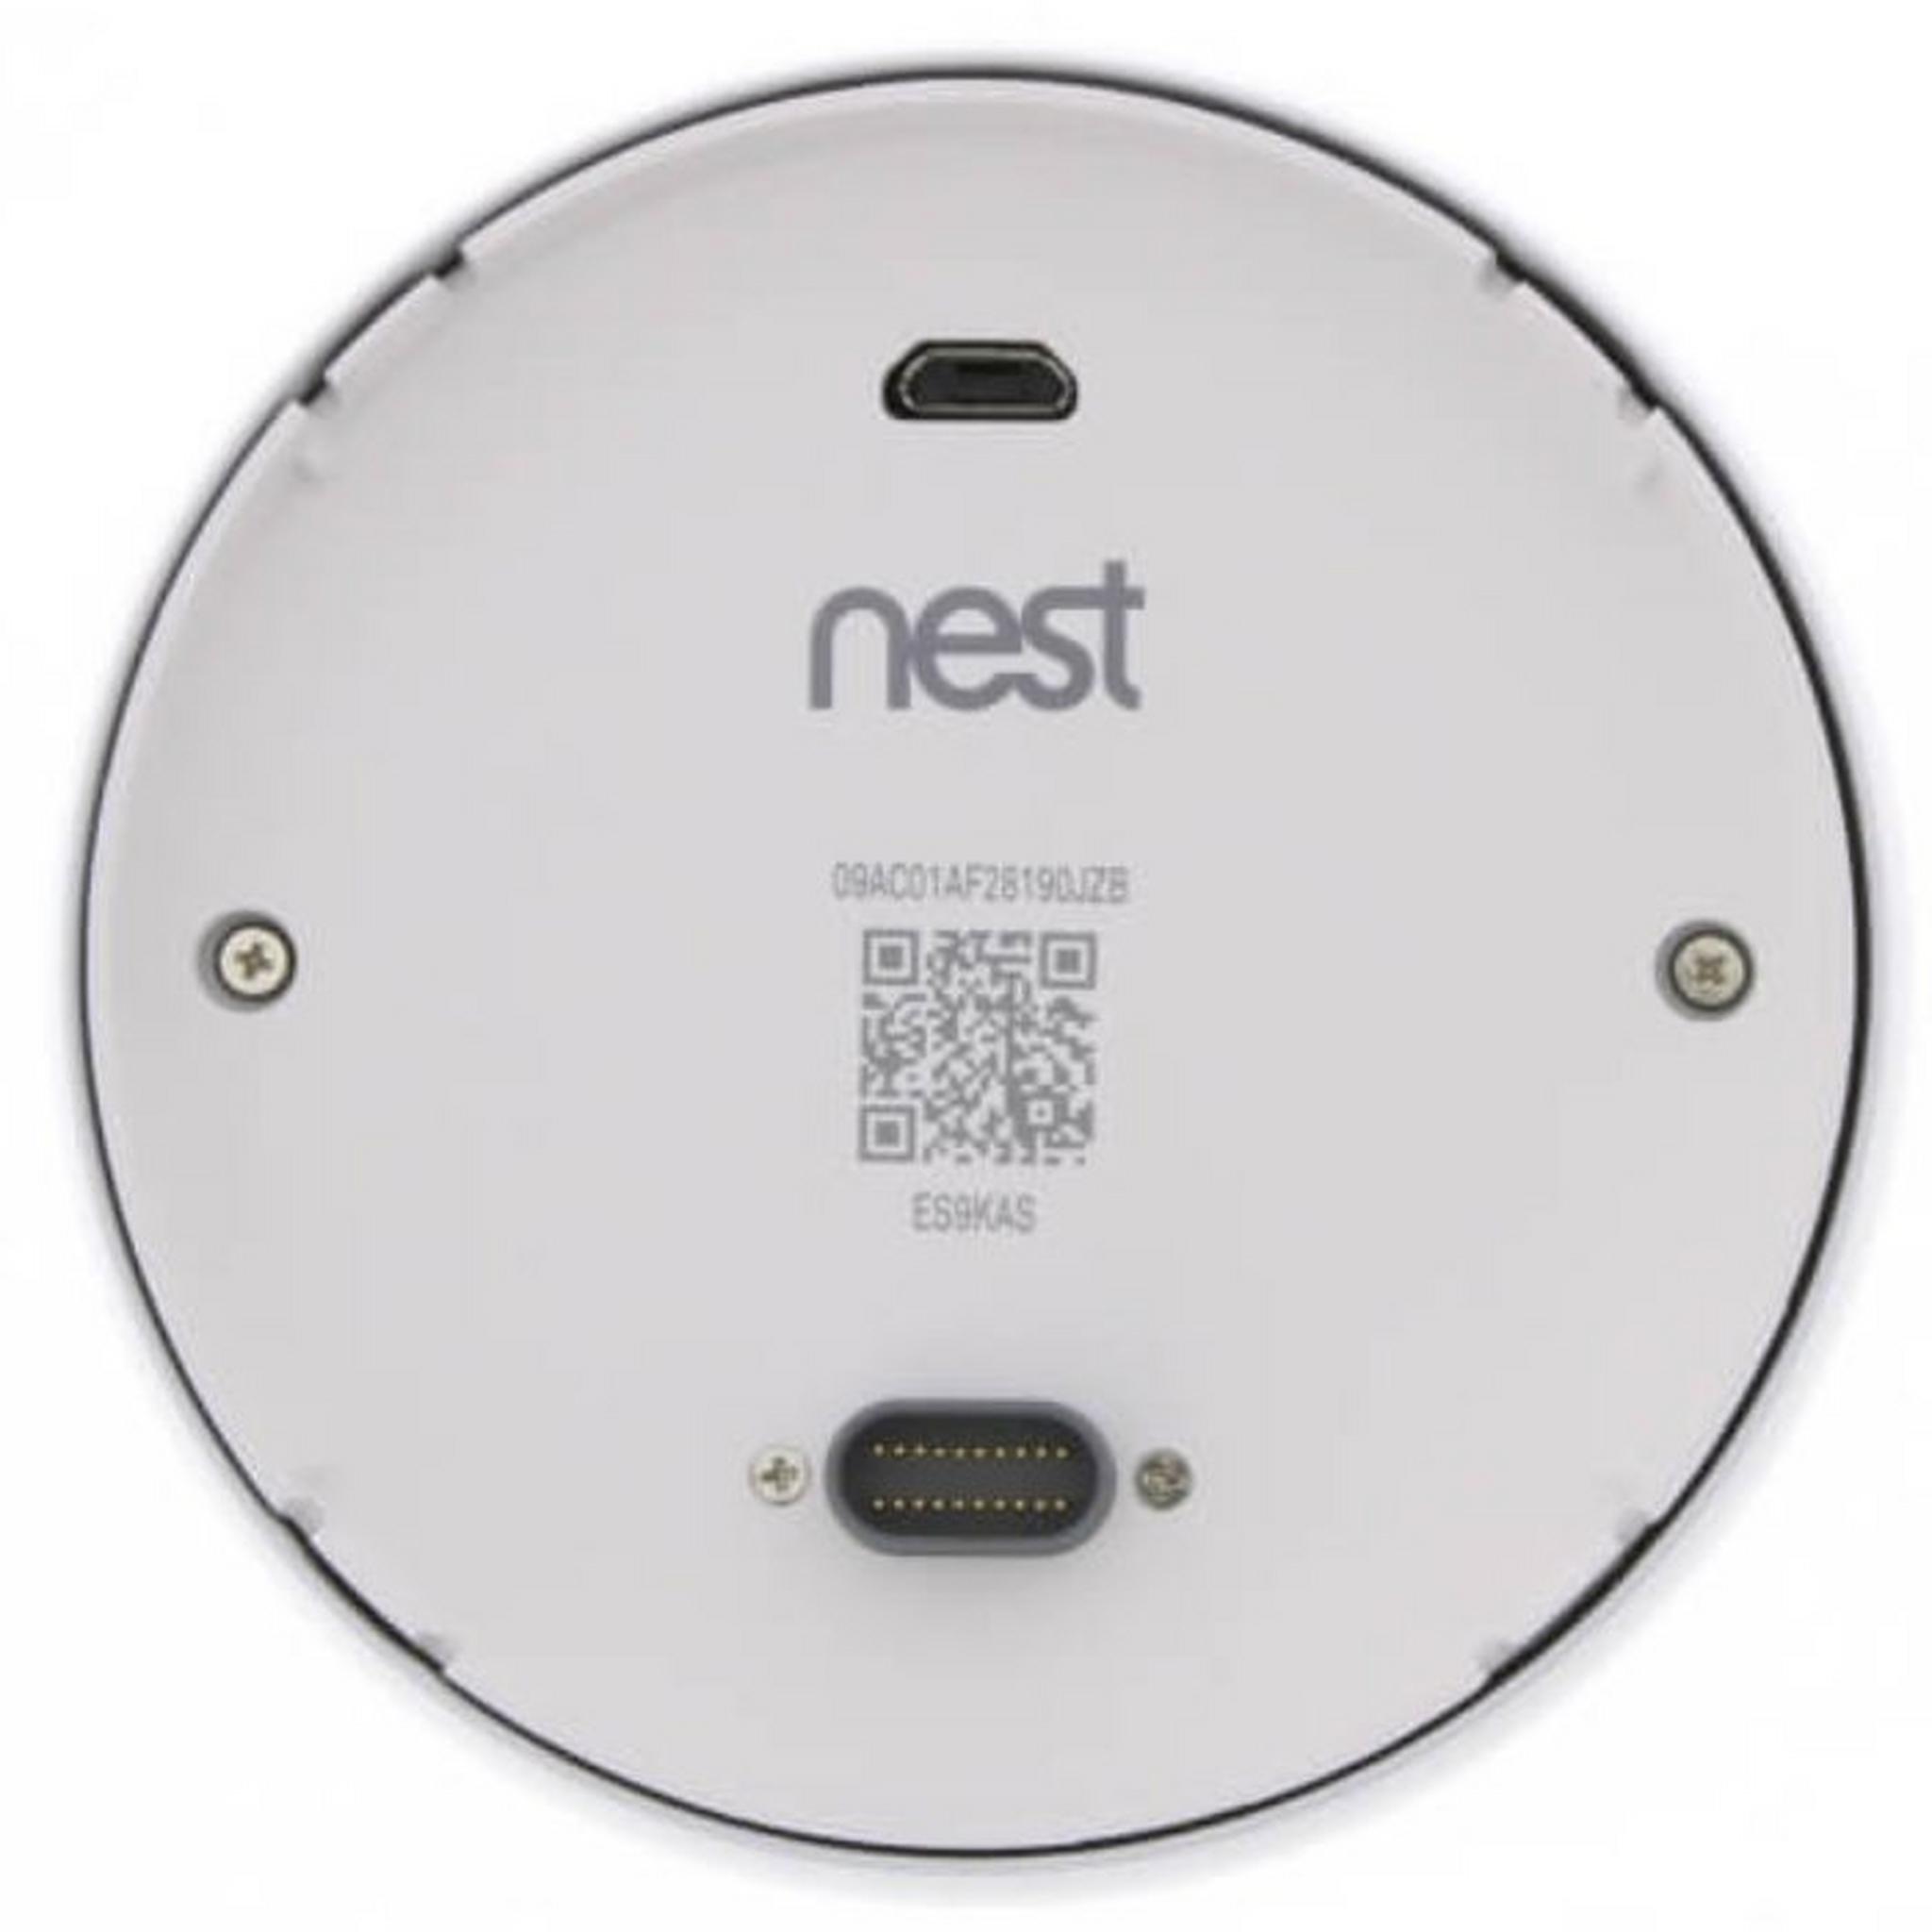 Google Nest Learning Thermostat 3rd Generation Smart Thermostat - White